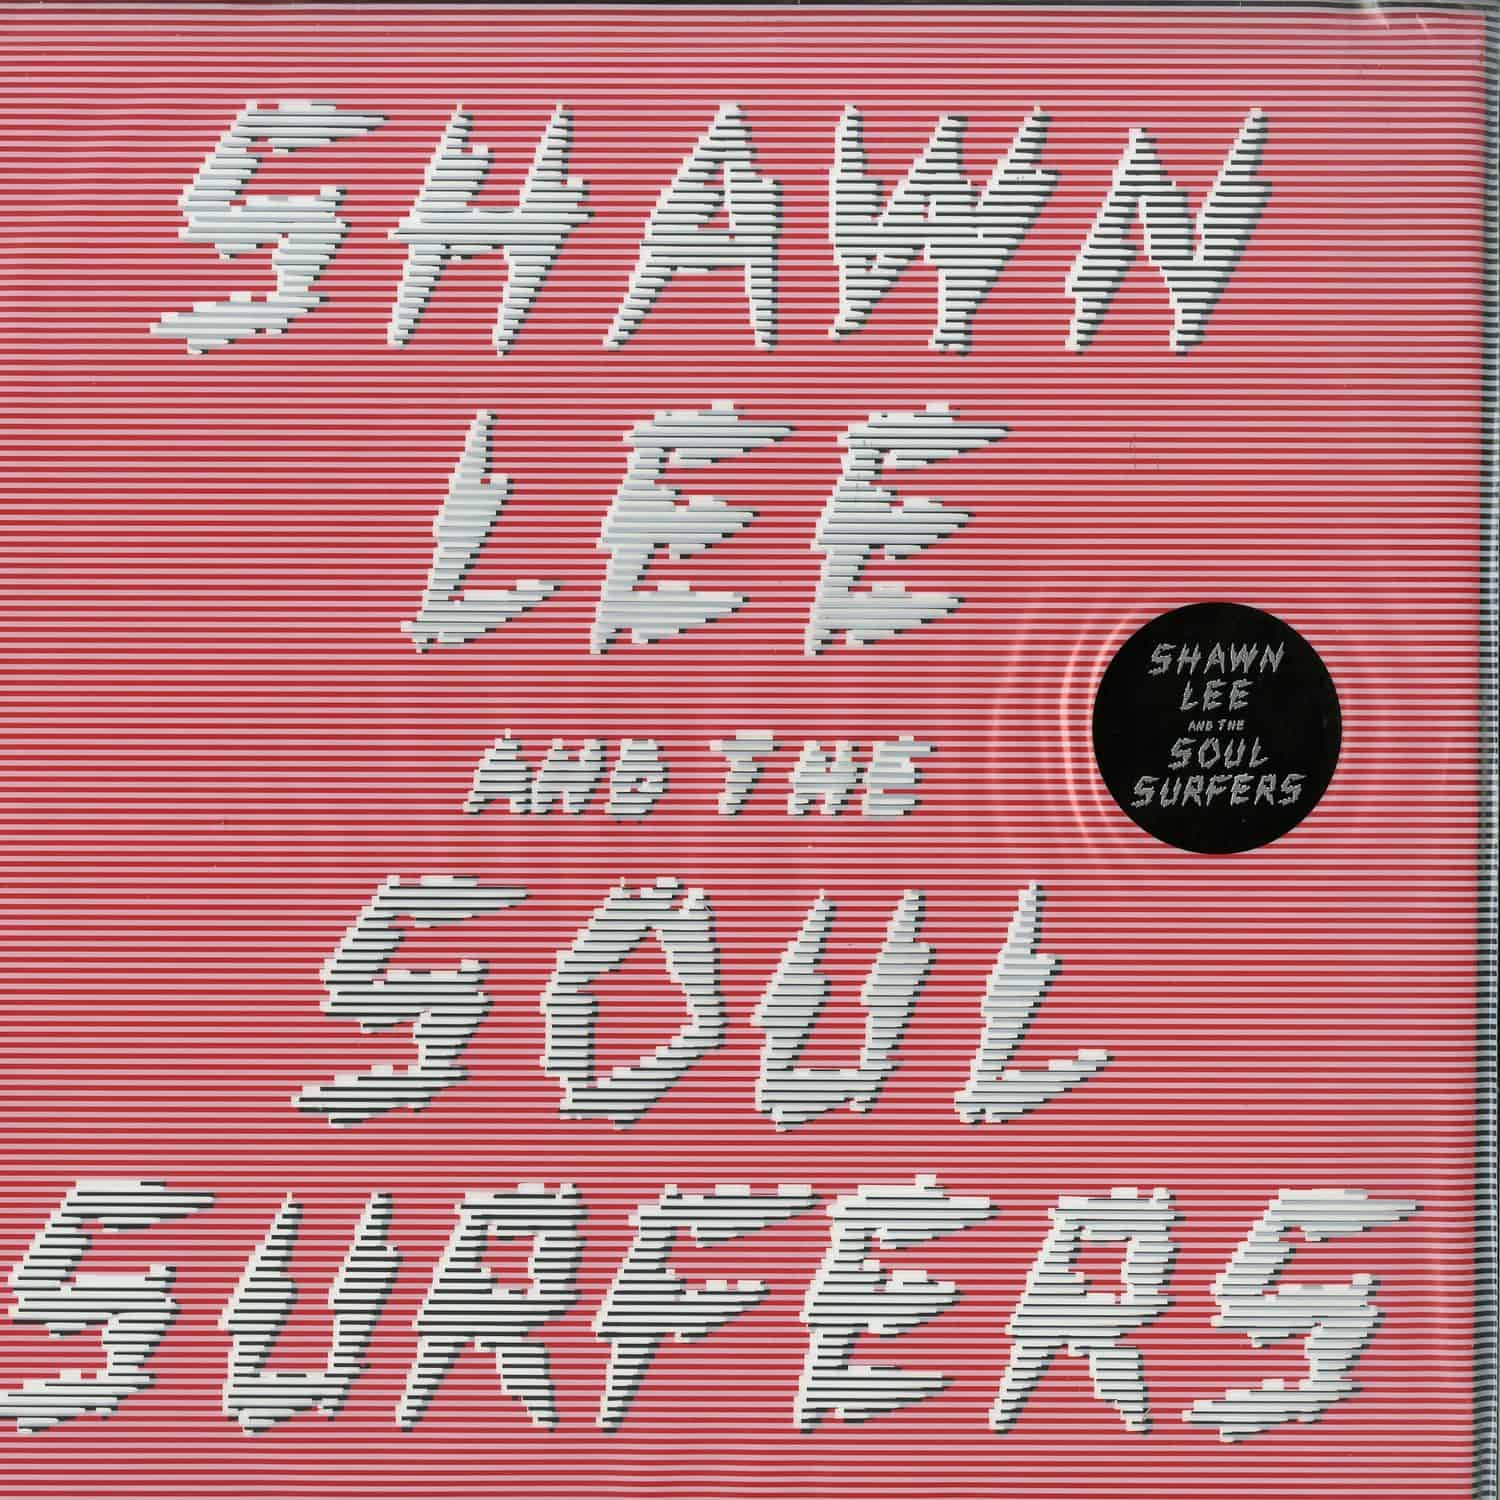 Shawn Lee & The Soul Surfers - SHAWN LEE & THE SOUL SURFERS 